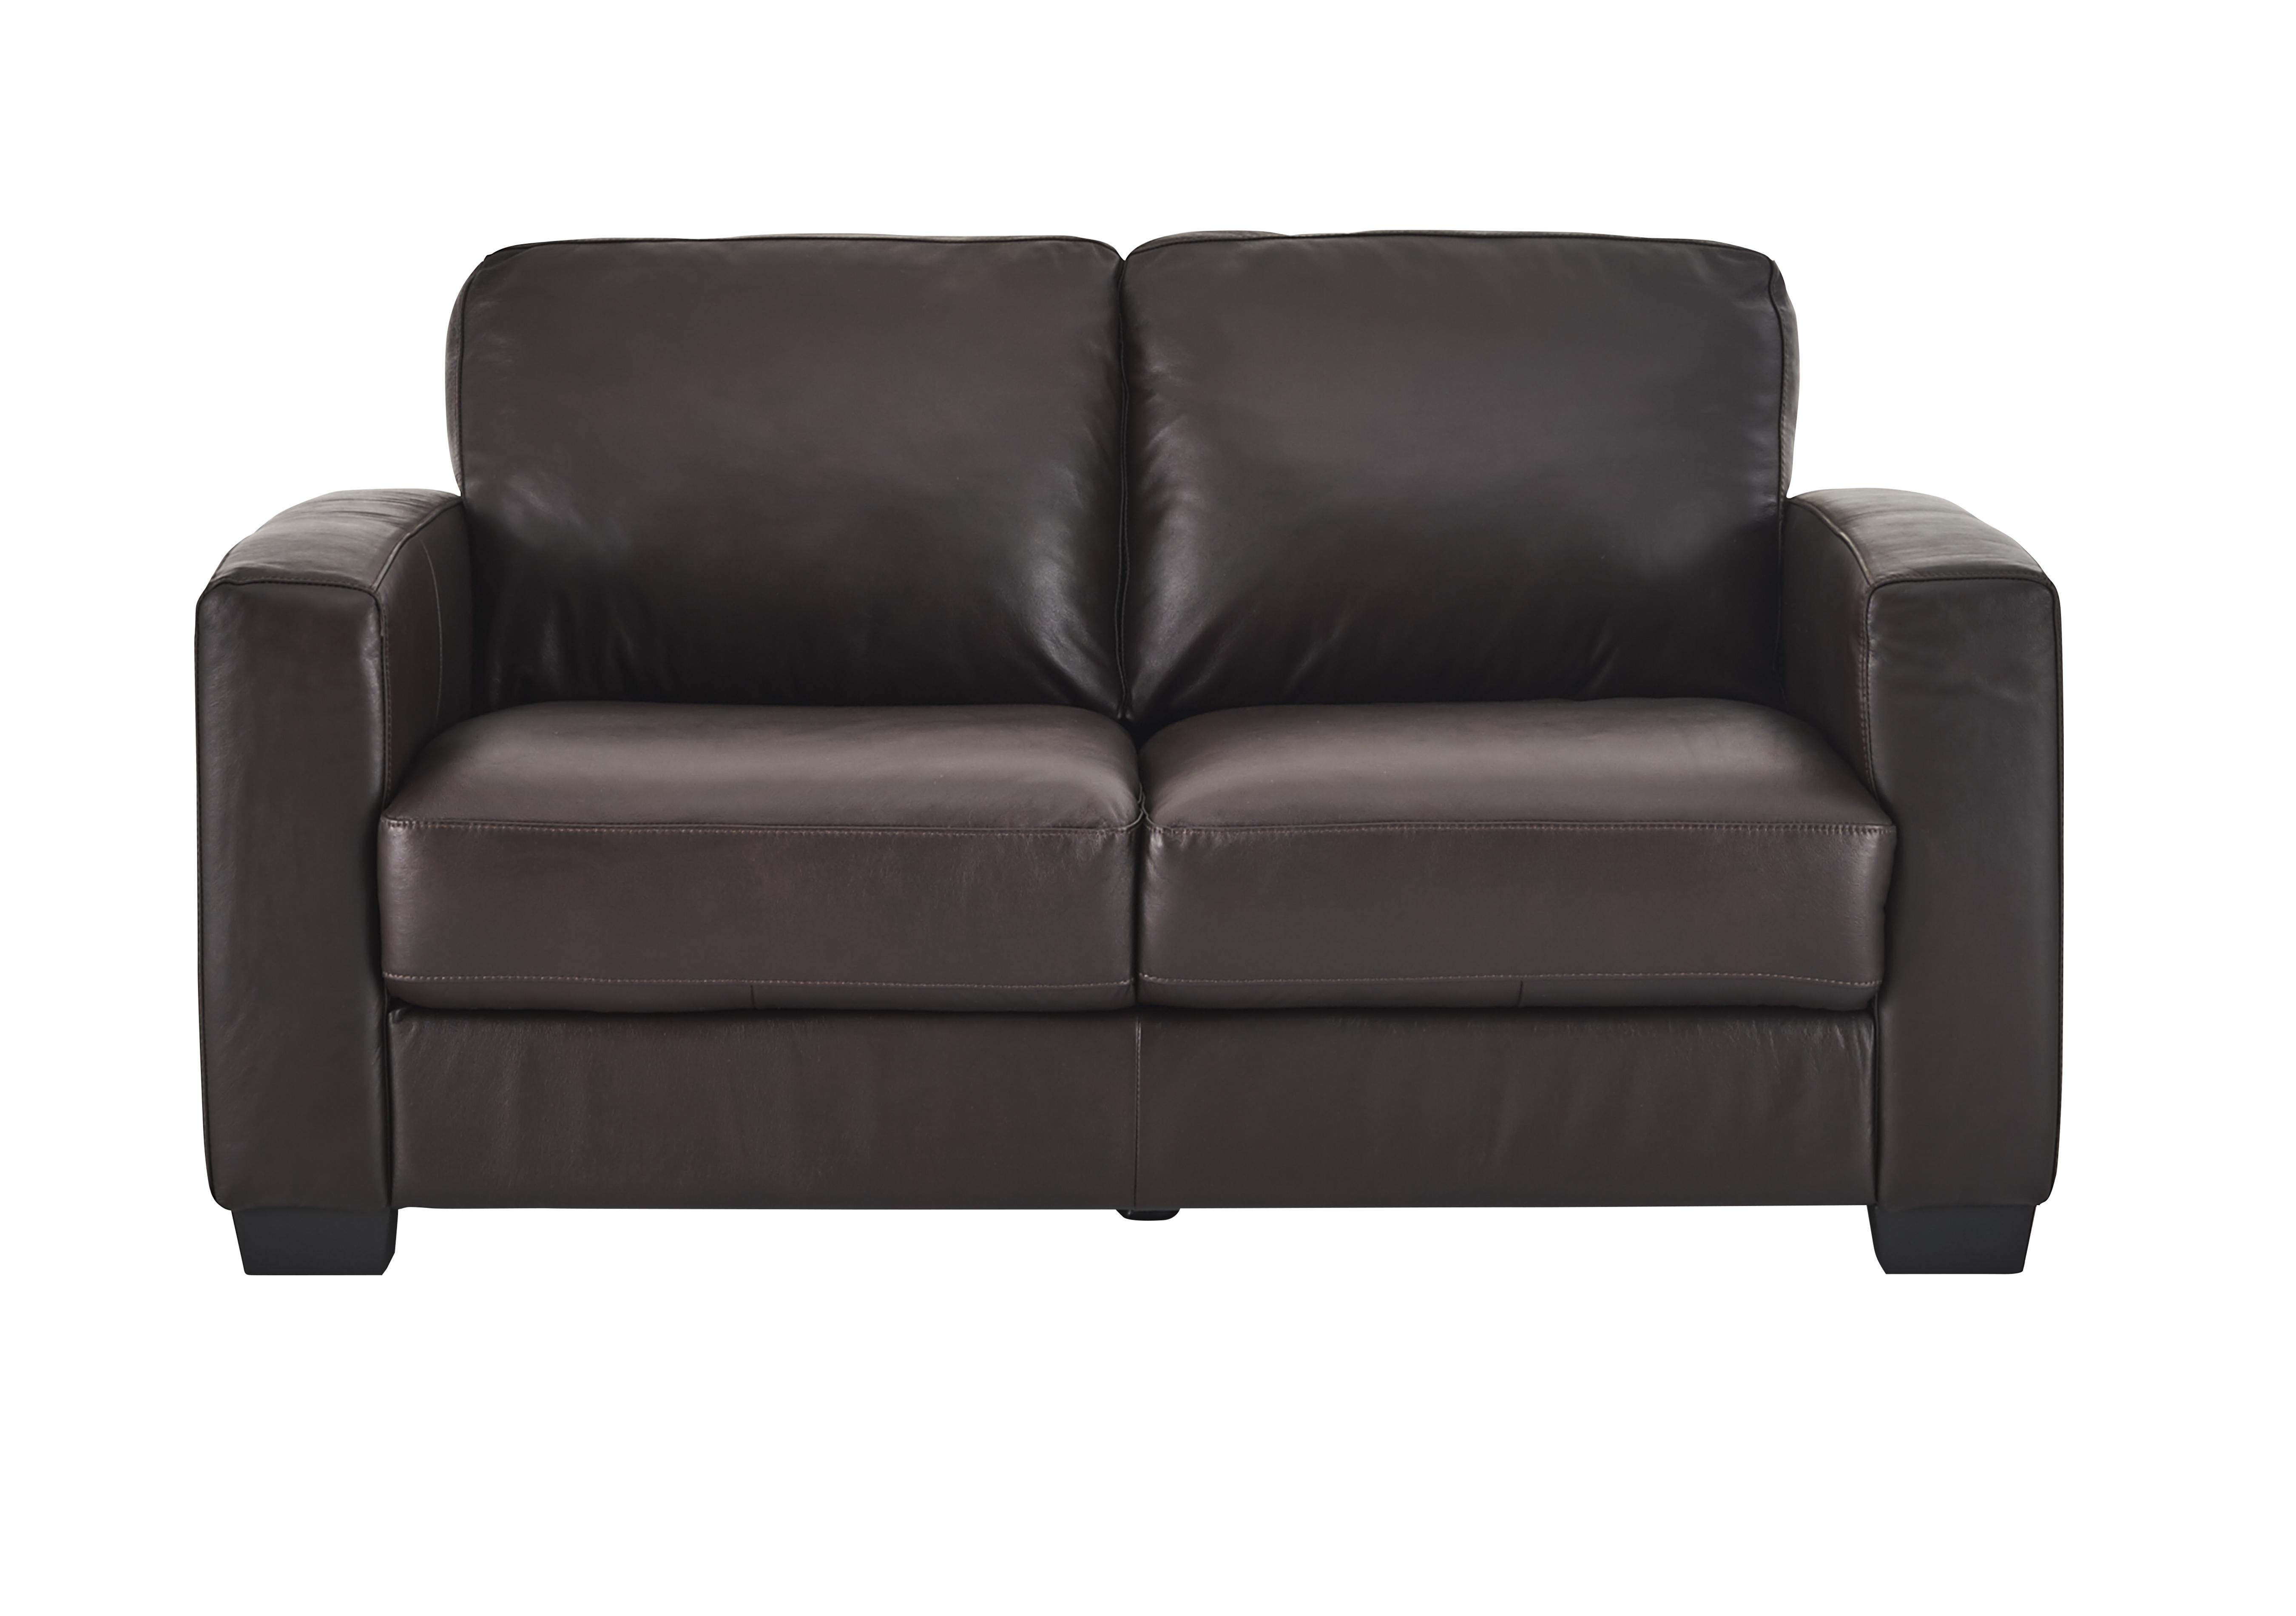 Leather Sofa Beds - Comfortable and Gorgeous - Furniture Village